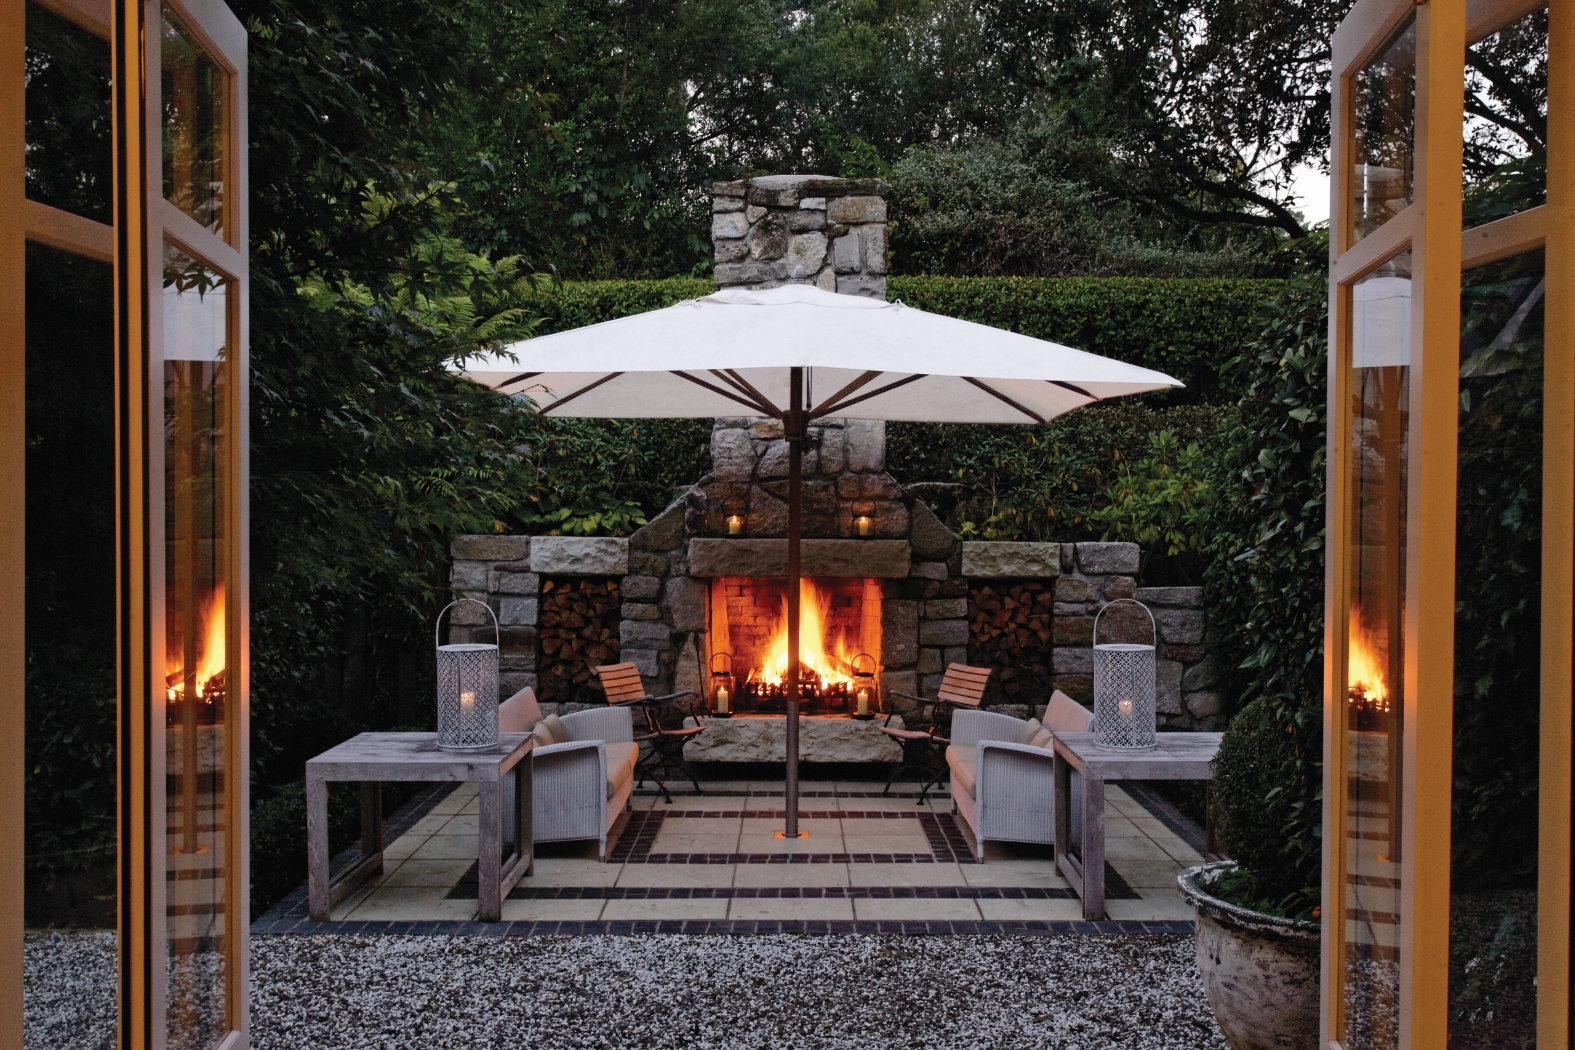 The outdoor fireplace of the owners cottage at Huka Lodge, New Zealand